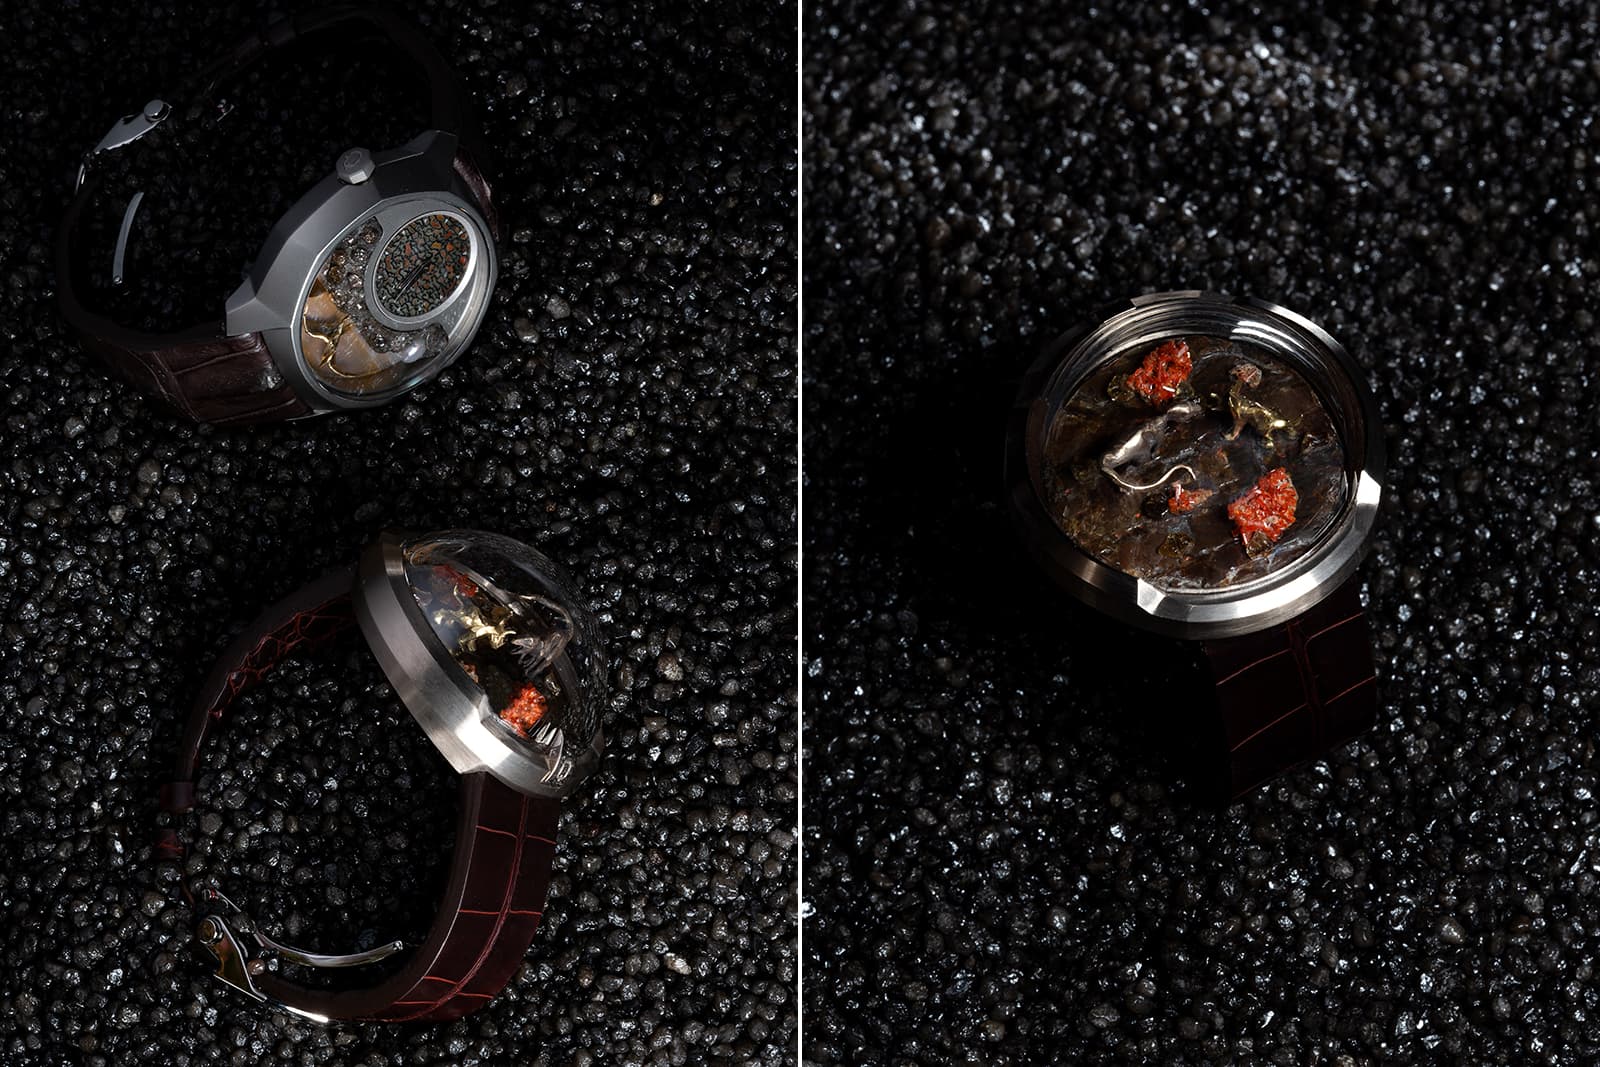 The Qannati Objet d'Art Jurassic Quantum timepiece and Jurassic Eternity Bracelet (left) and a closer look at the Jurassic Eternity Bracelet (right) with opalised ammolite fossil, rough diamonds and yellow and white gold 